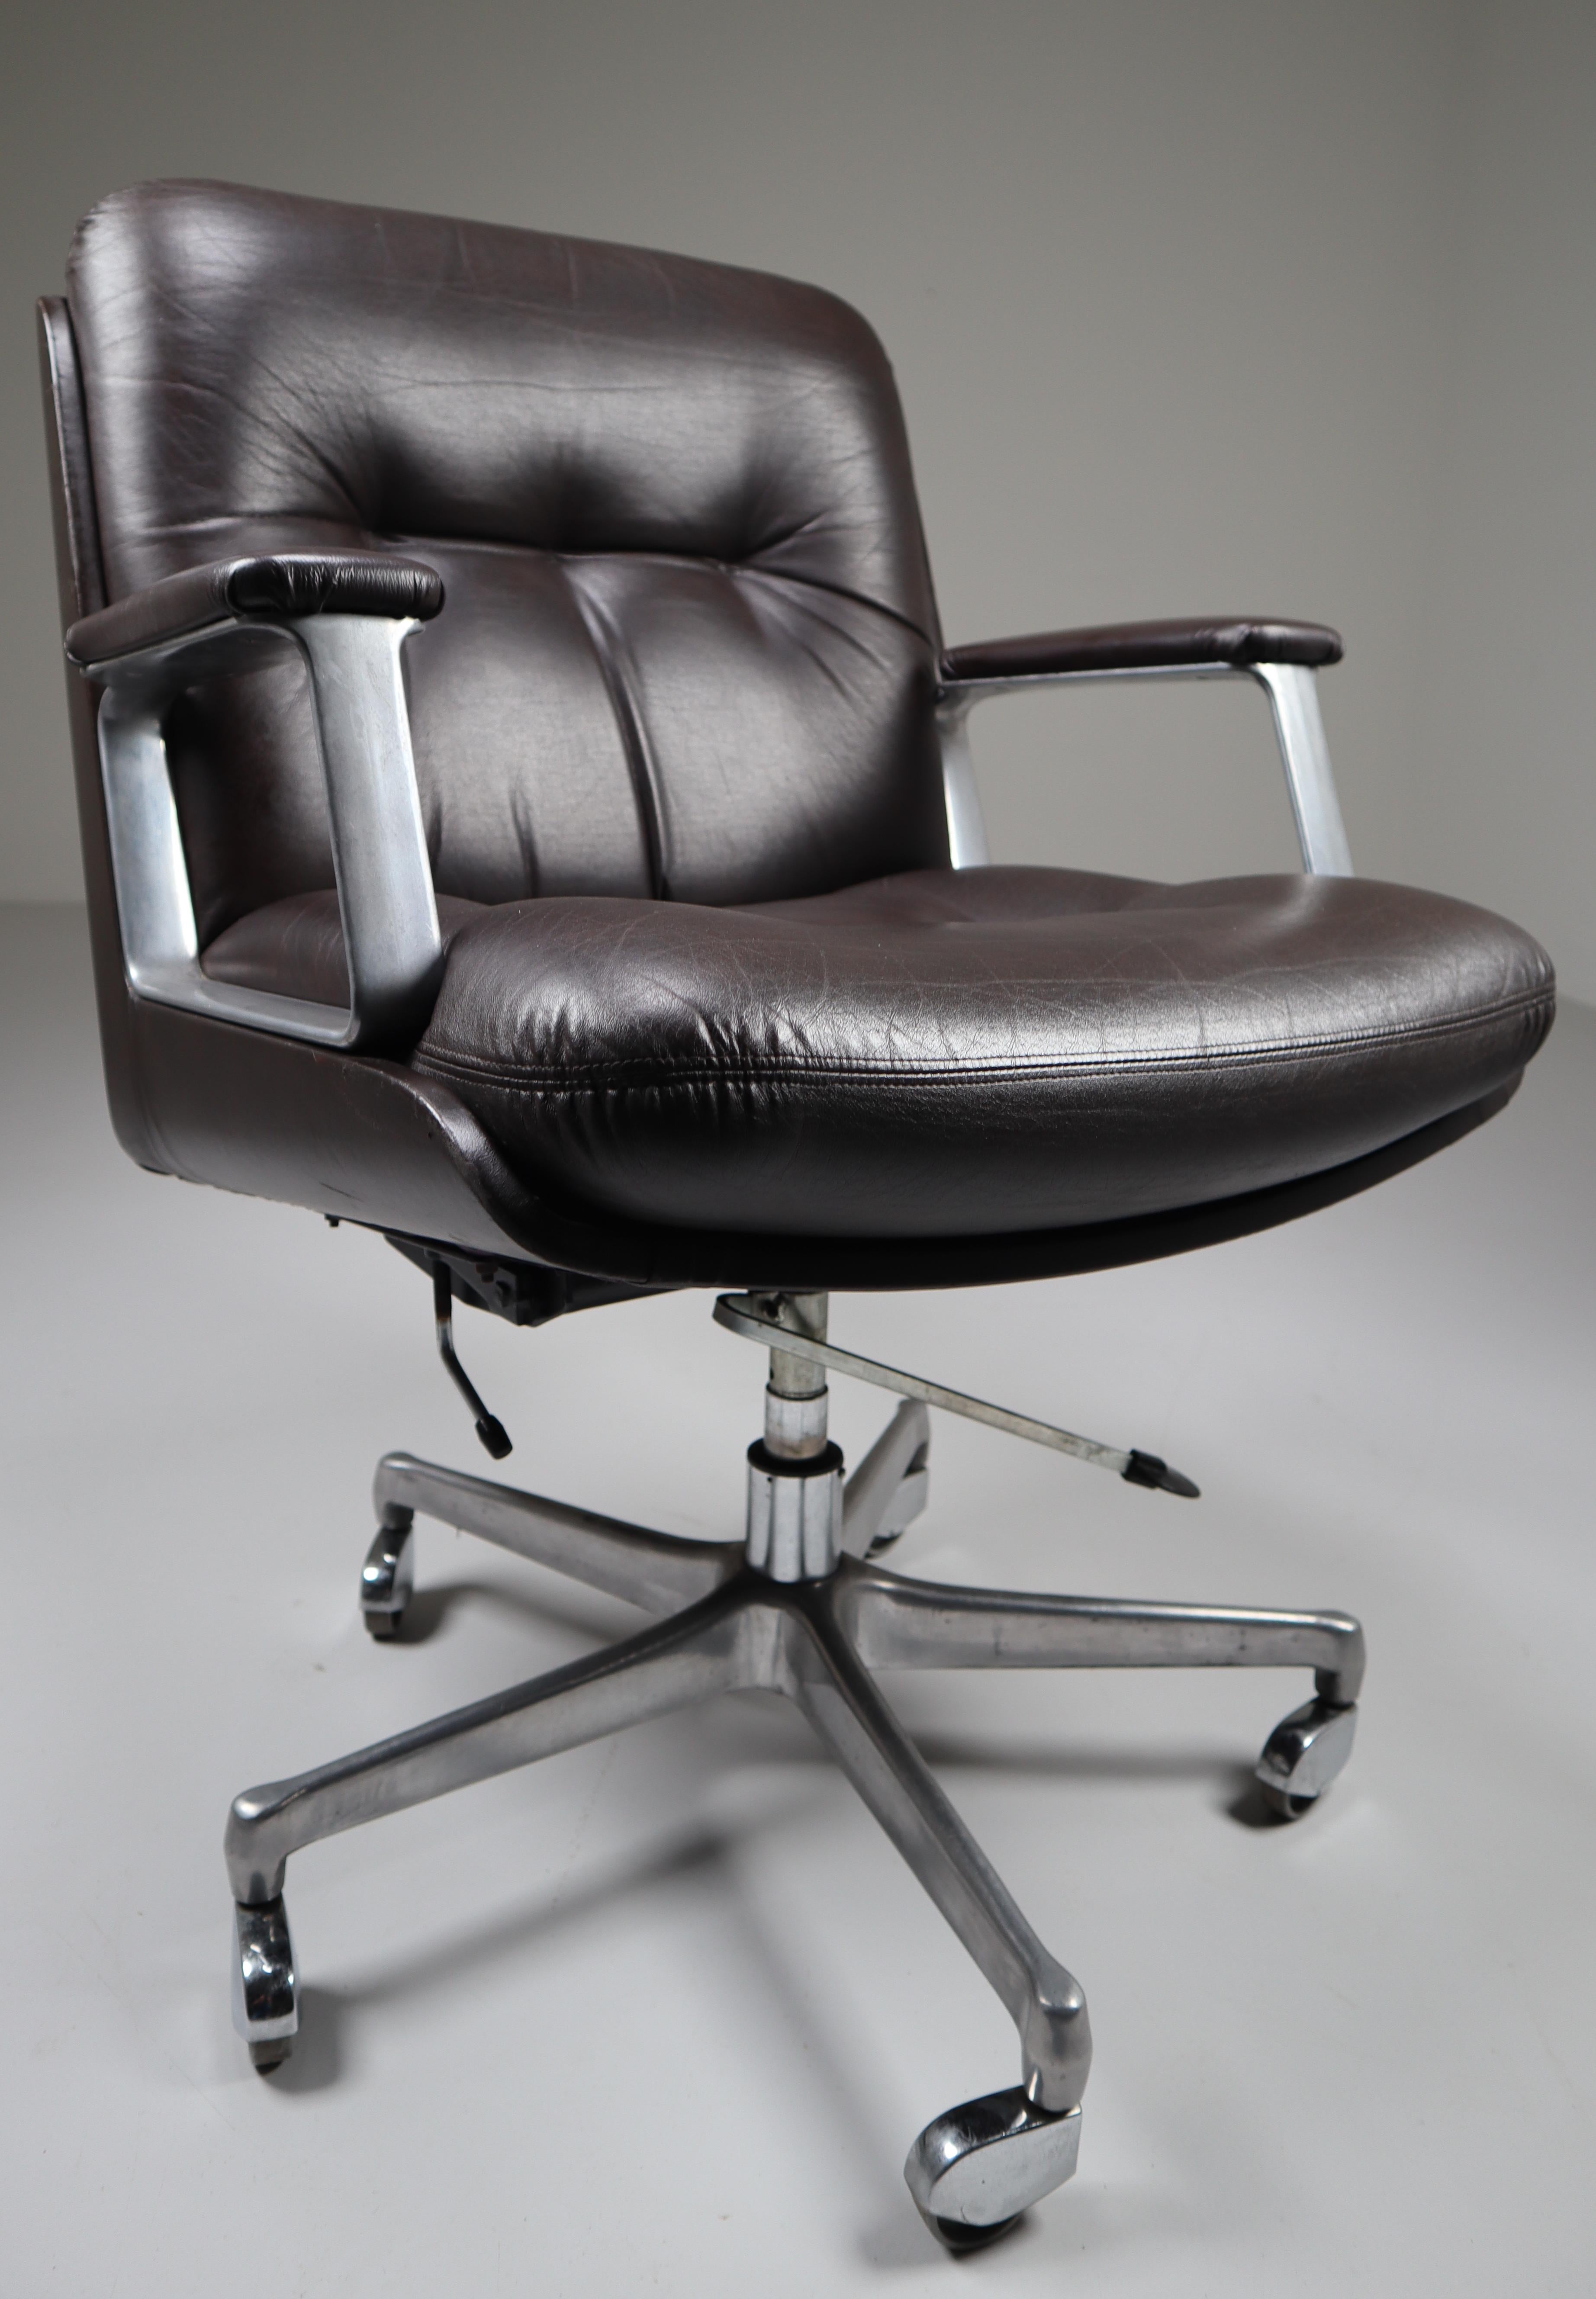 Executive office armchairs by Osvaldo Borsani for the Italian manufacturer Tecno features a elegant brown leather body with a generously proportioned button-tufted leather seat and back and floating on a five-pronged rolling adjustable cast aluminum